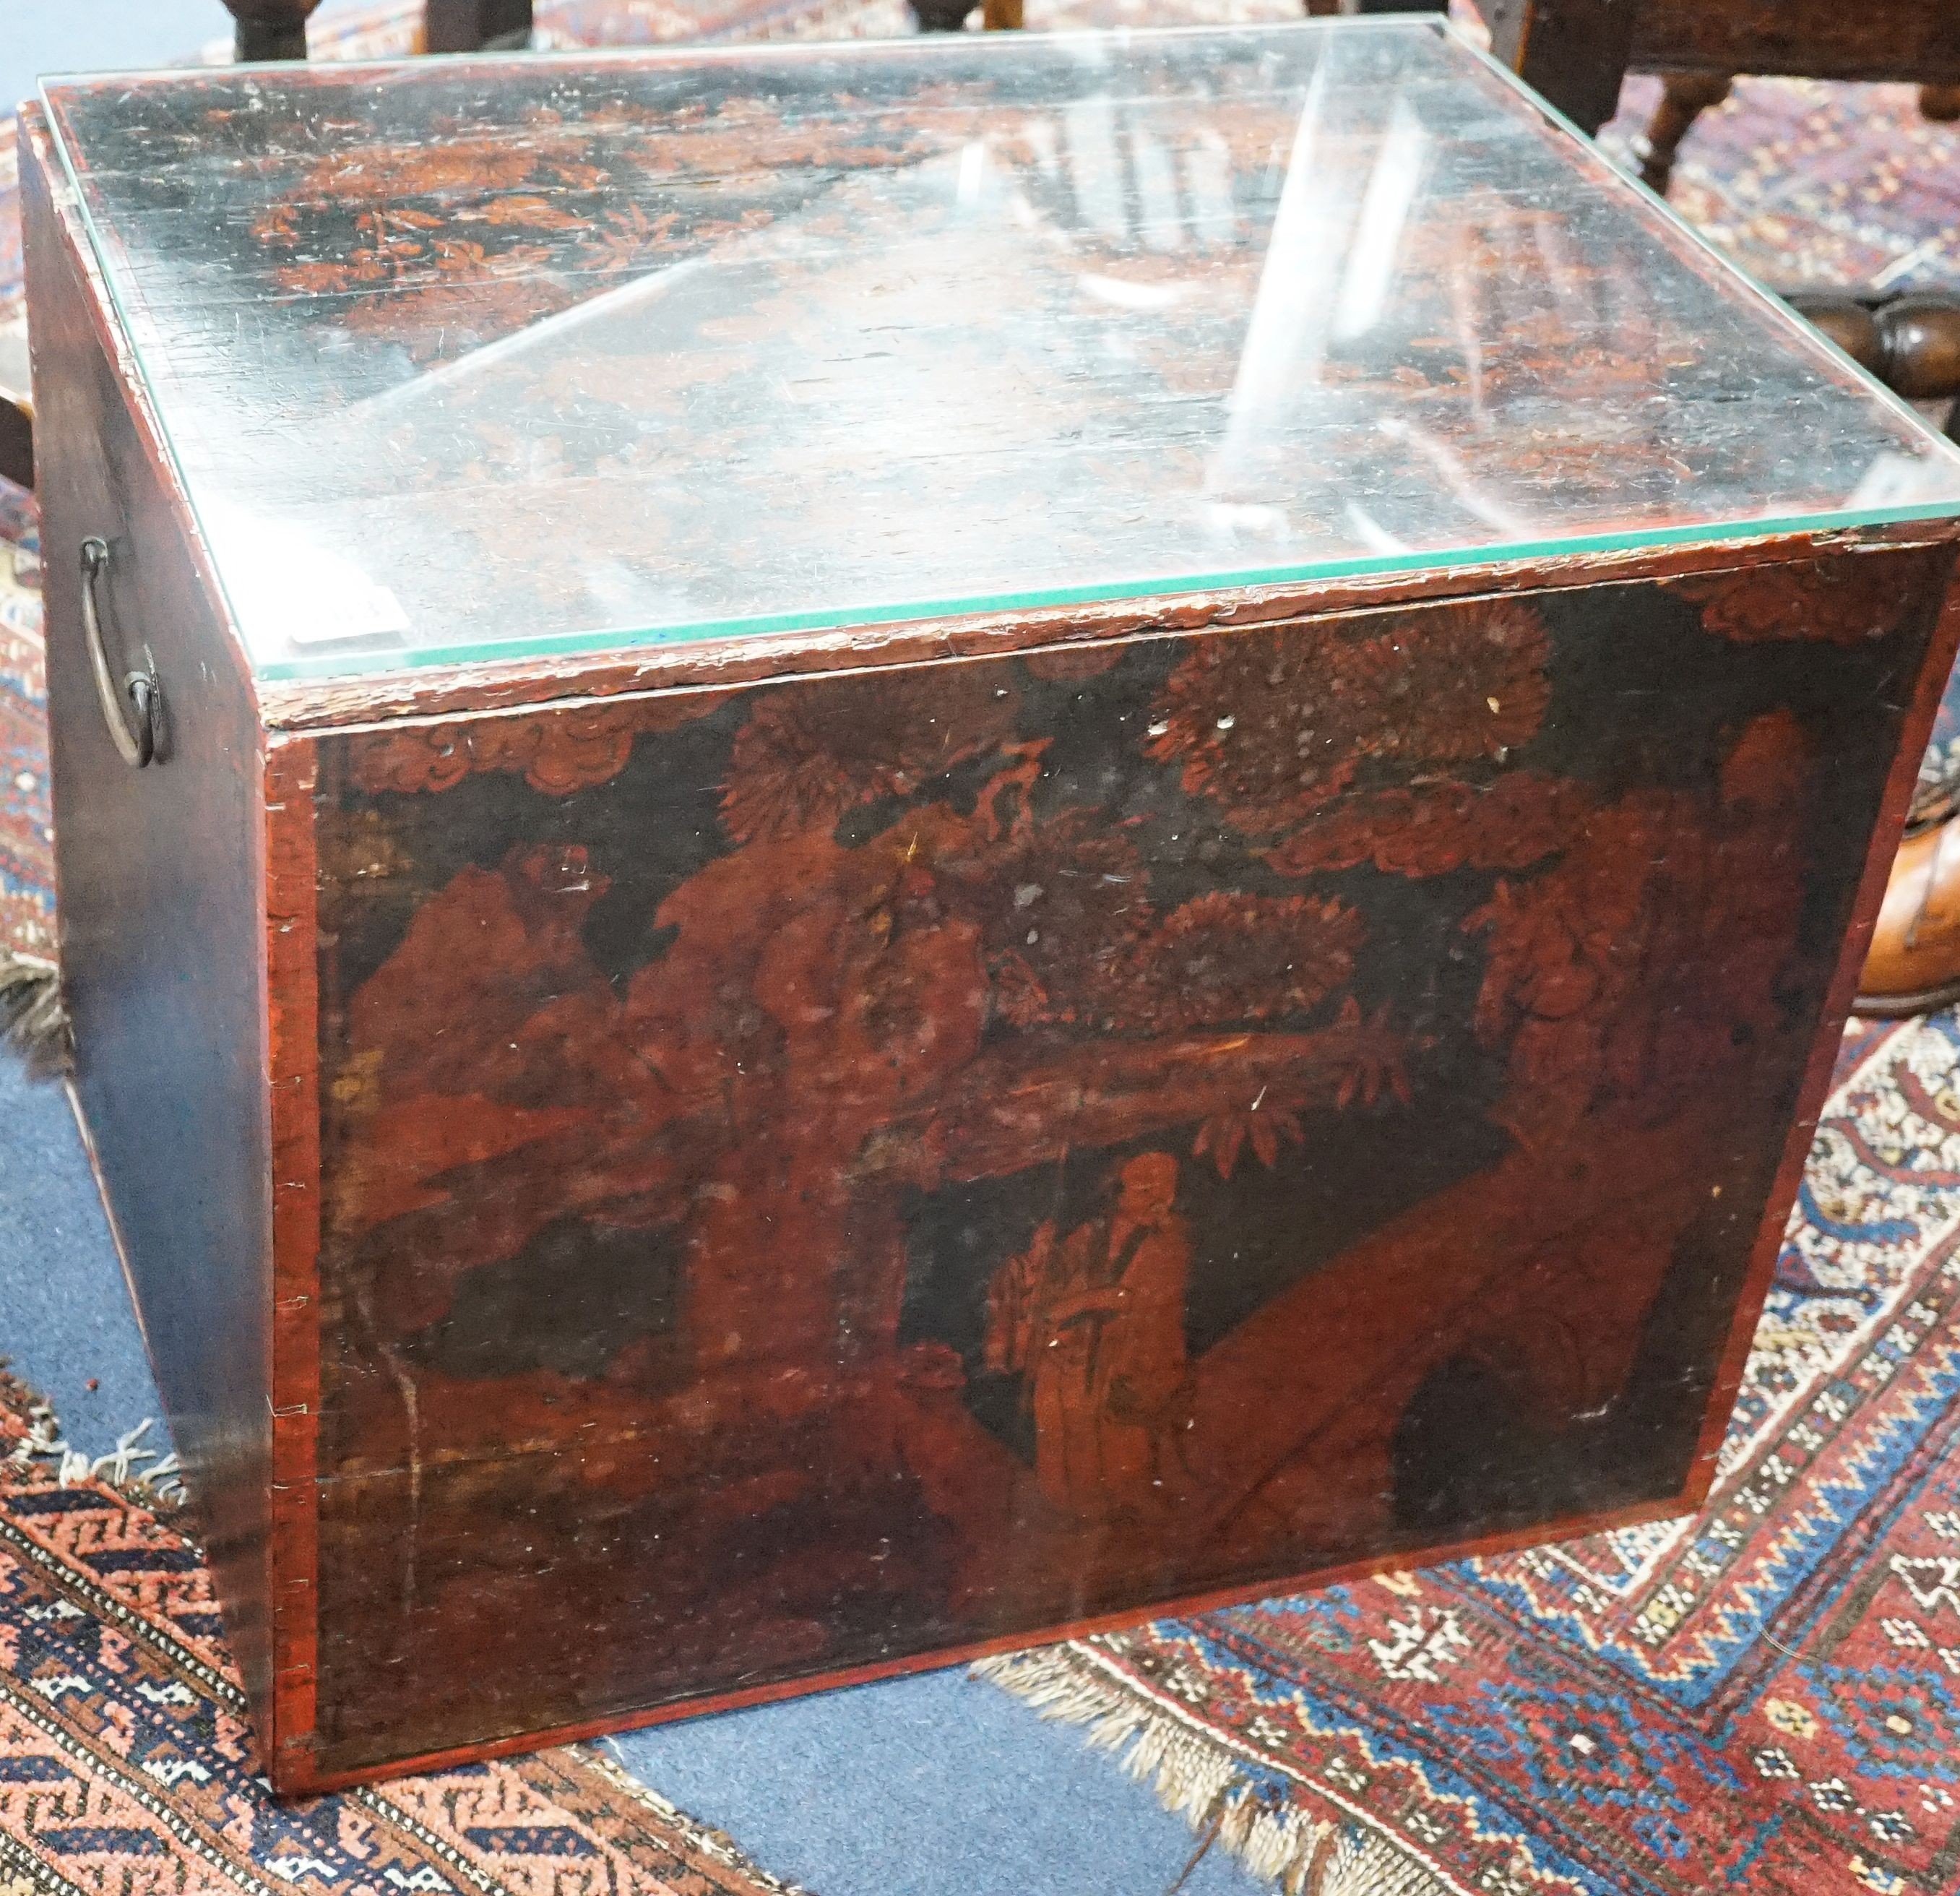 A 19th century Chinese export lacquer work tea chest, width 54cm, depth 40cm, height 43cm